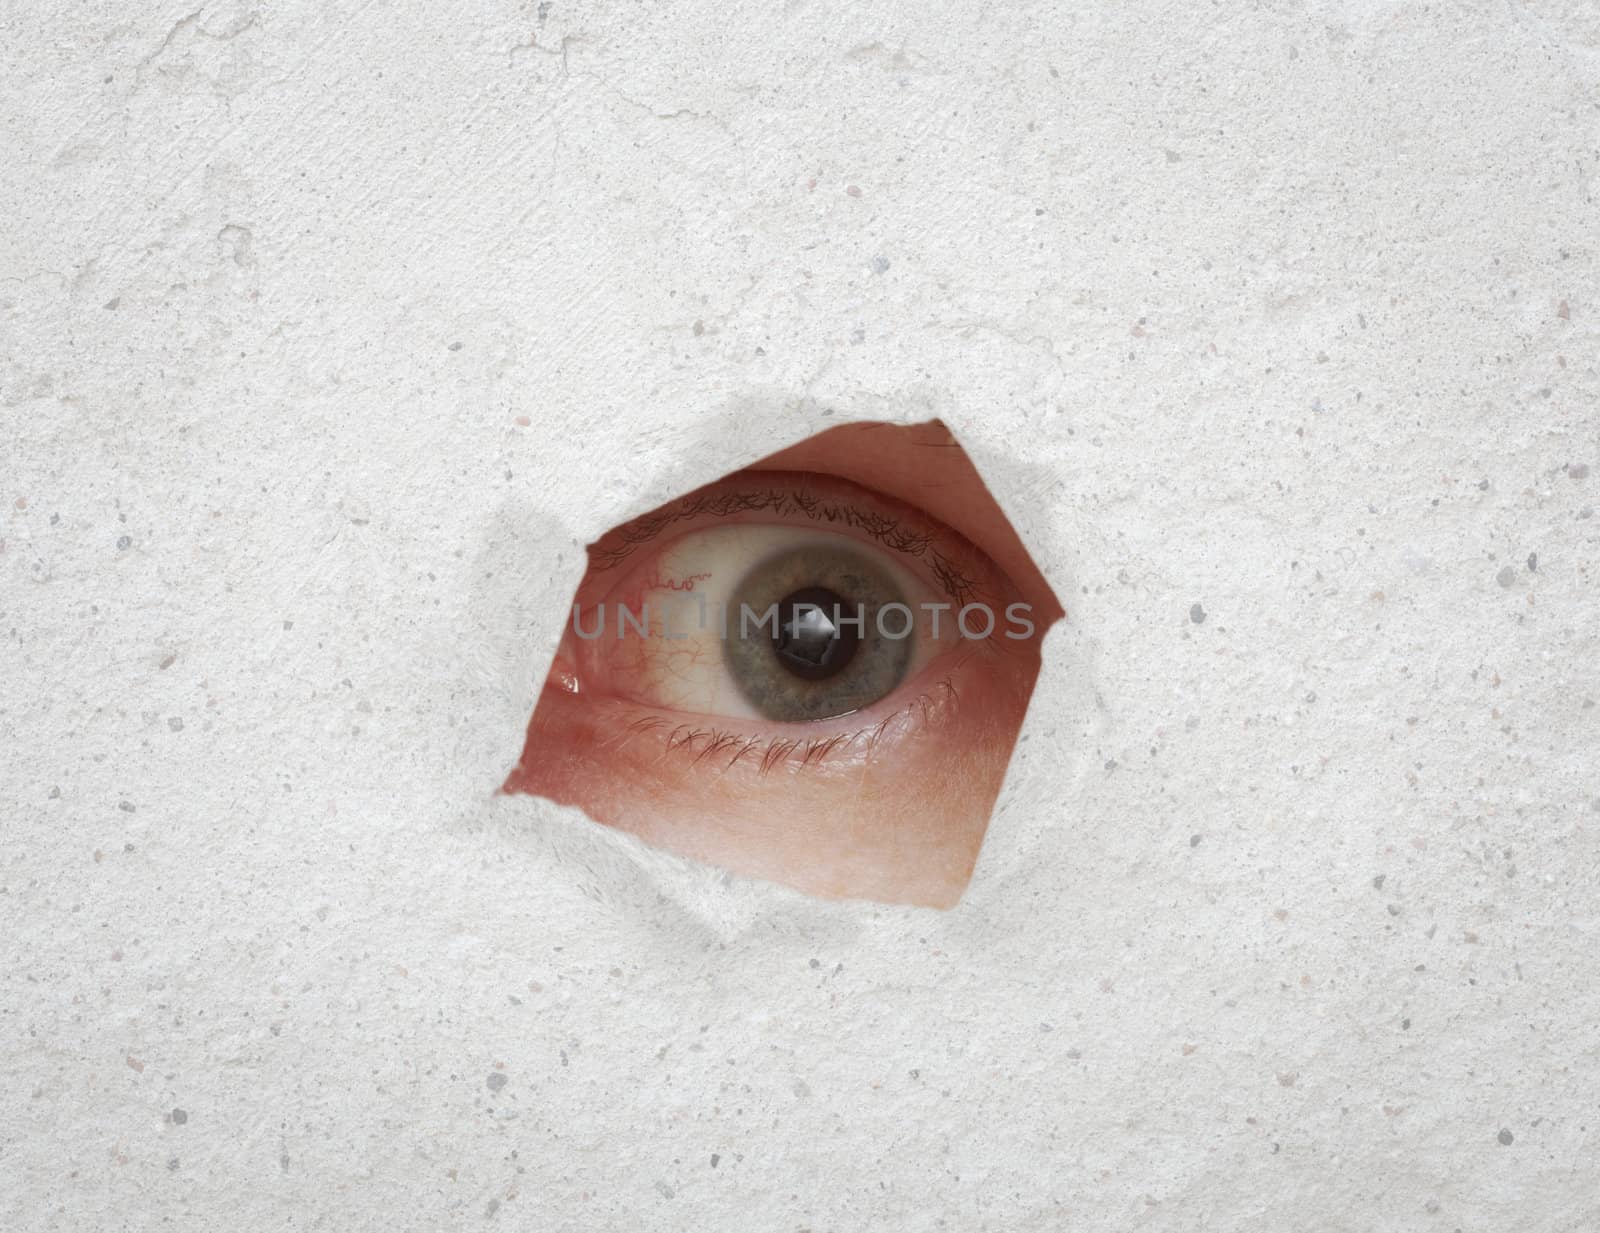 Eye looking through a hole in the rough gray wall